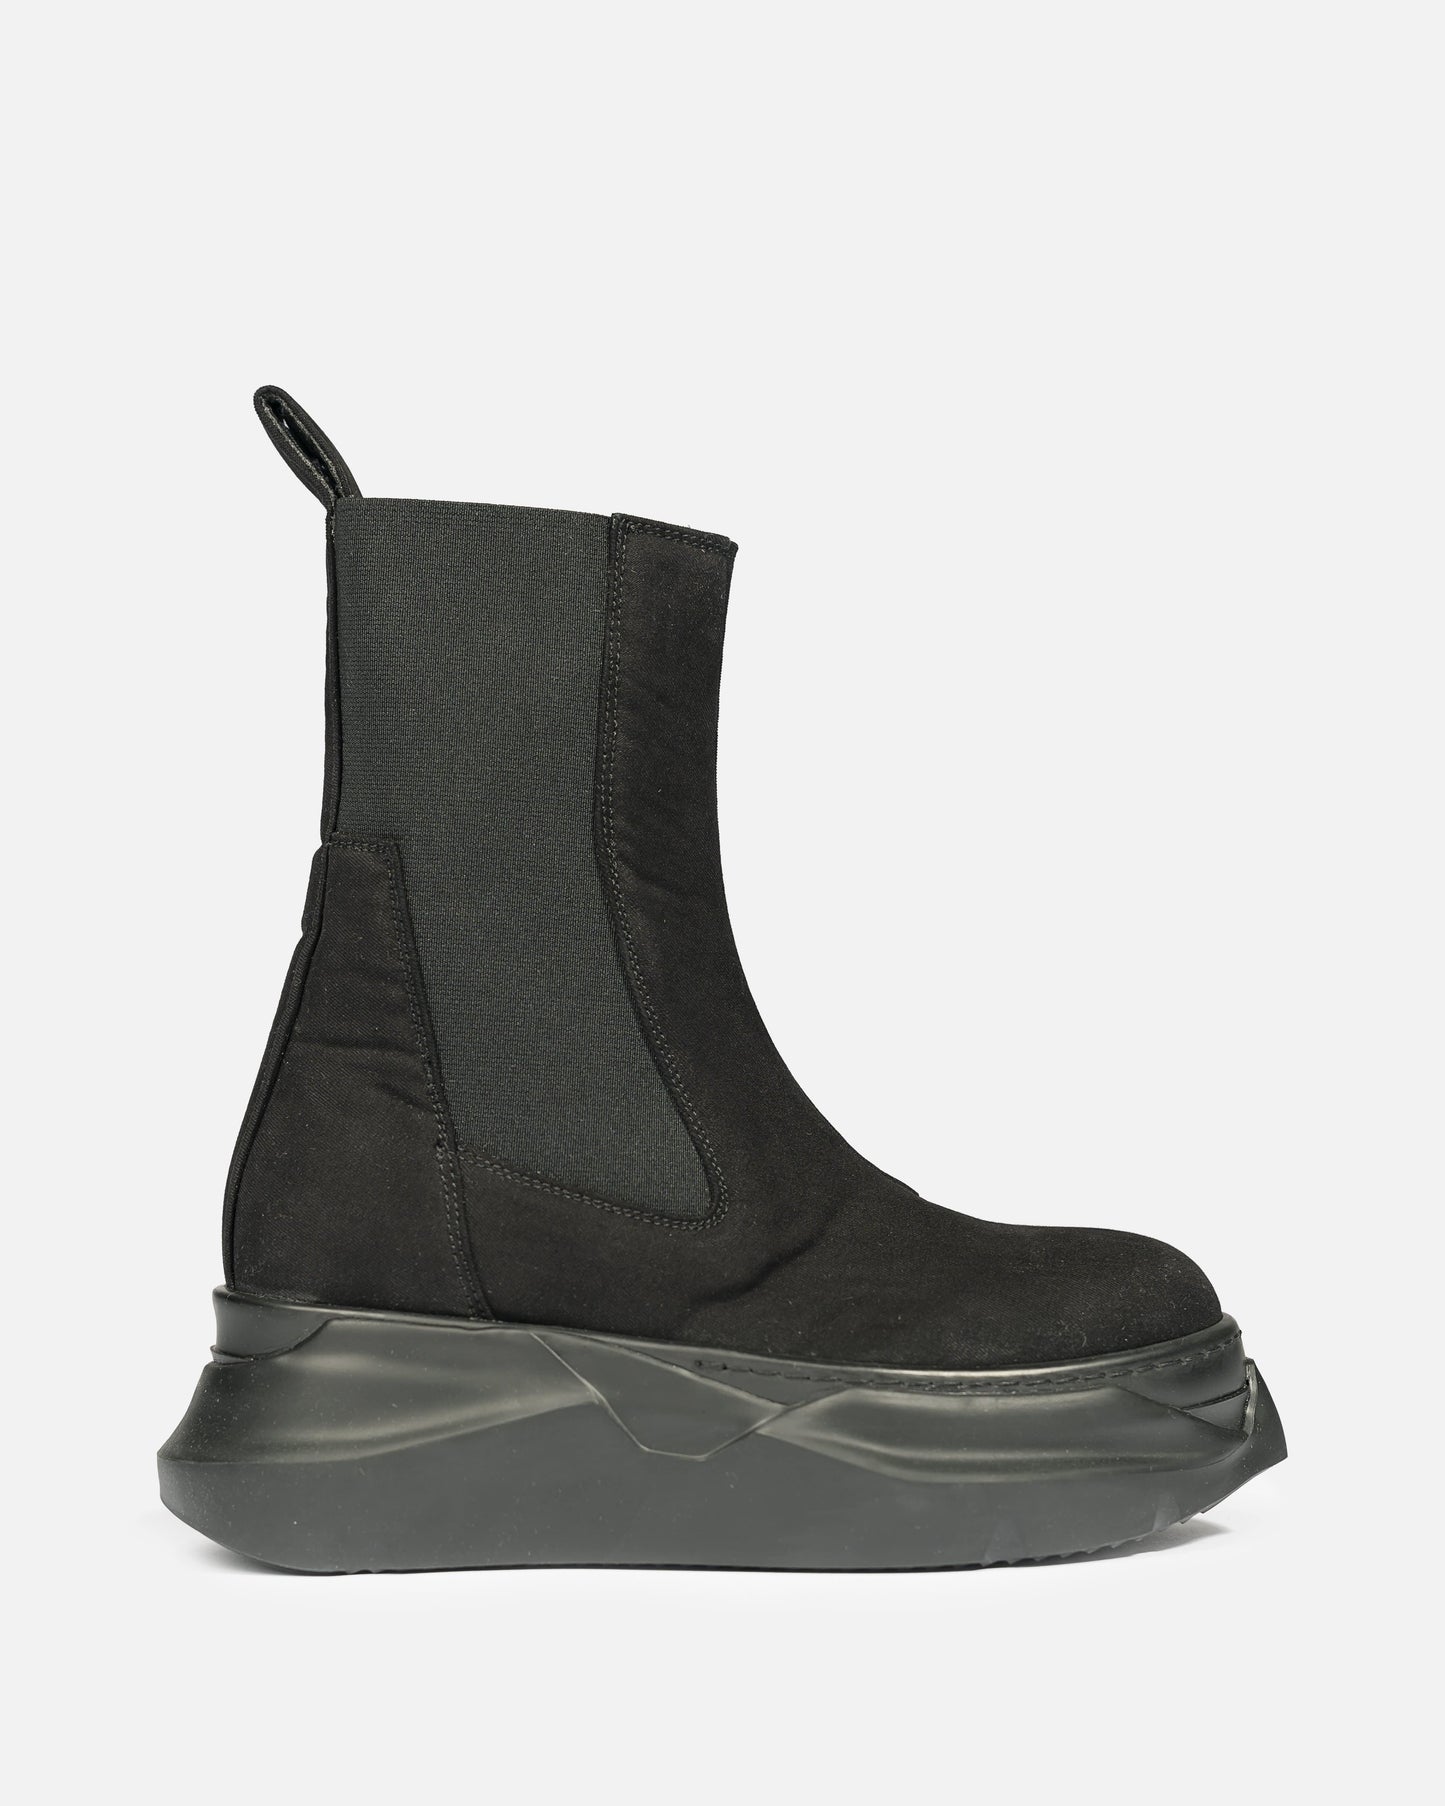 Rick Owens DRKSHDW Women Boots Woven Abstract Beatle in Black/Black